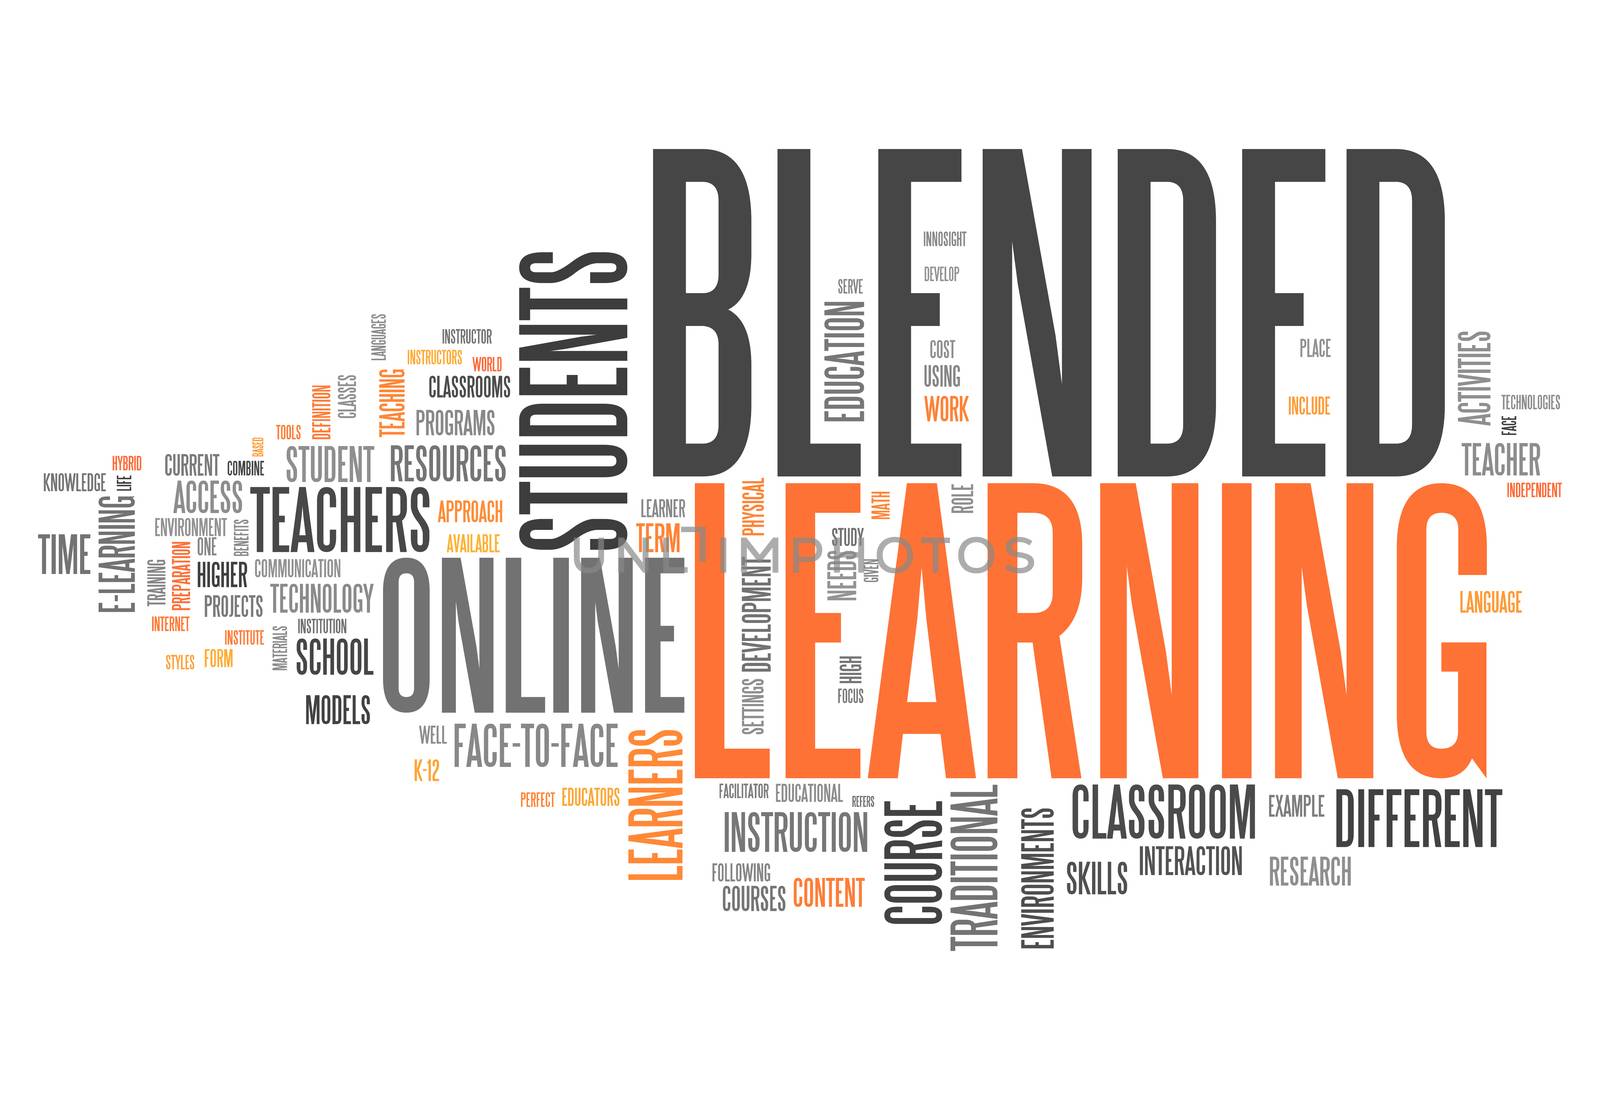 Word Cloud "Blended Learning" by mindscanner